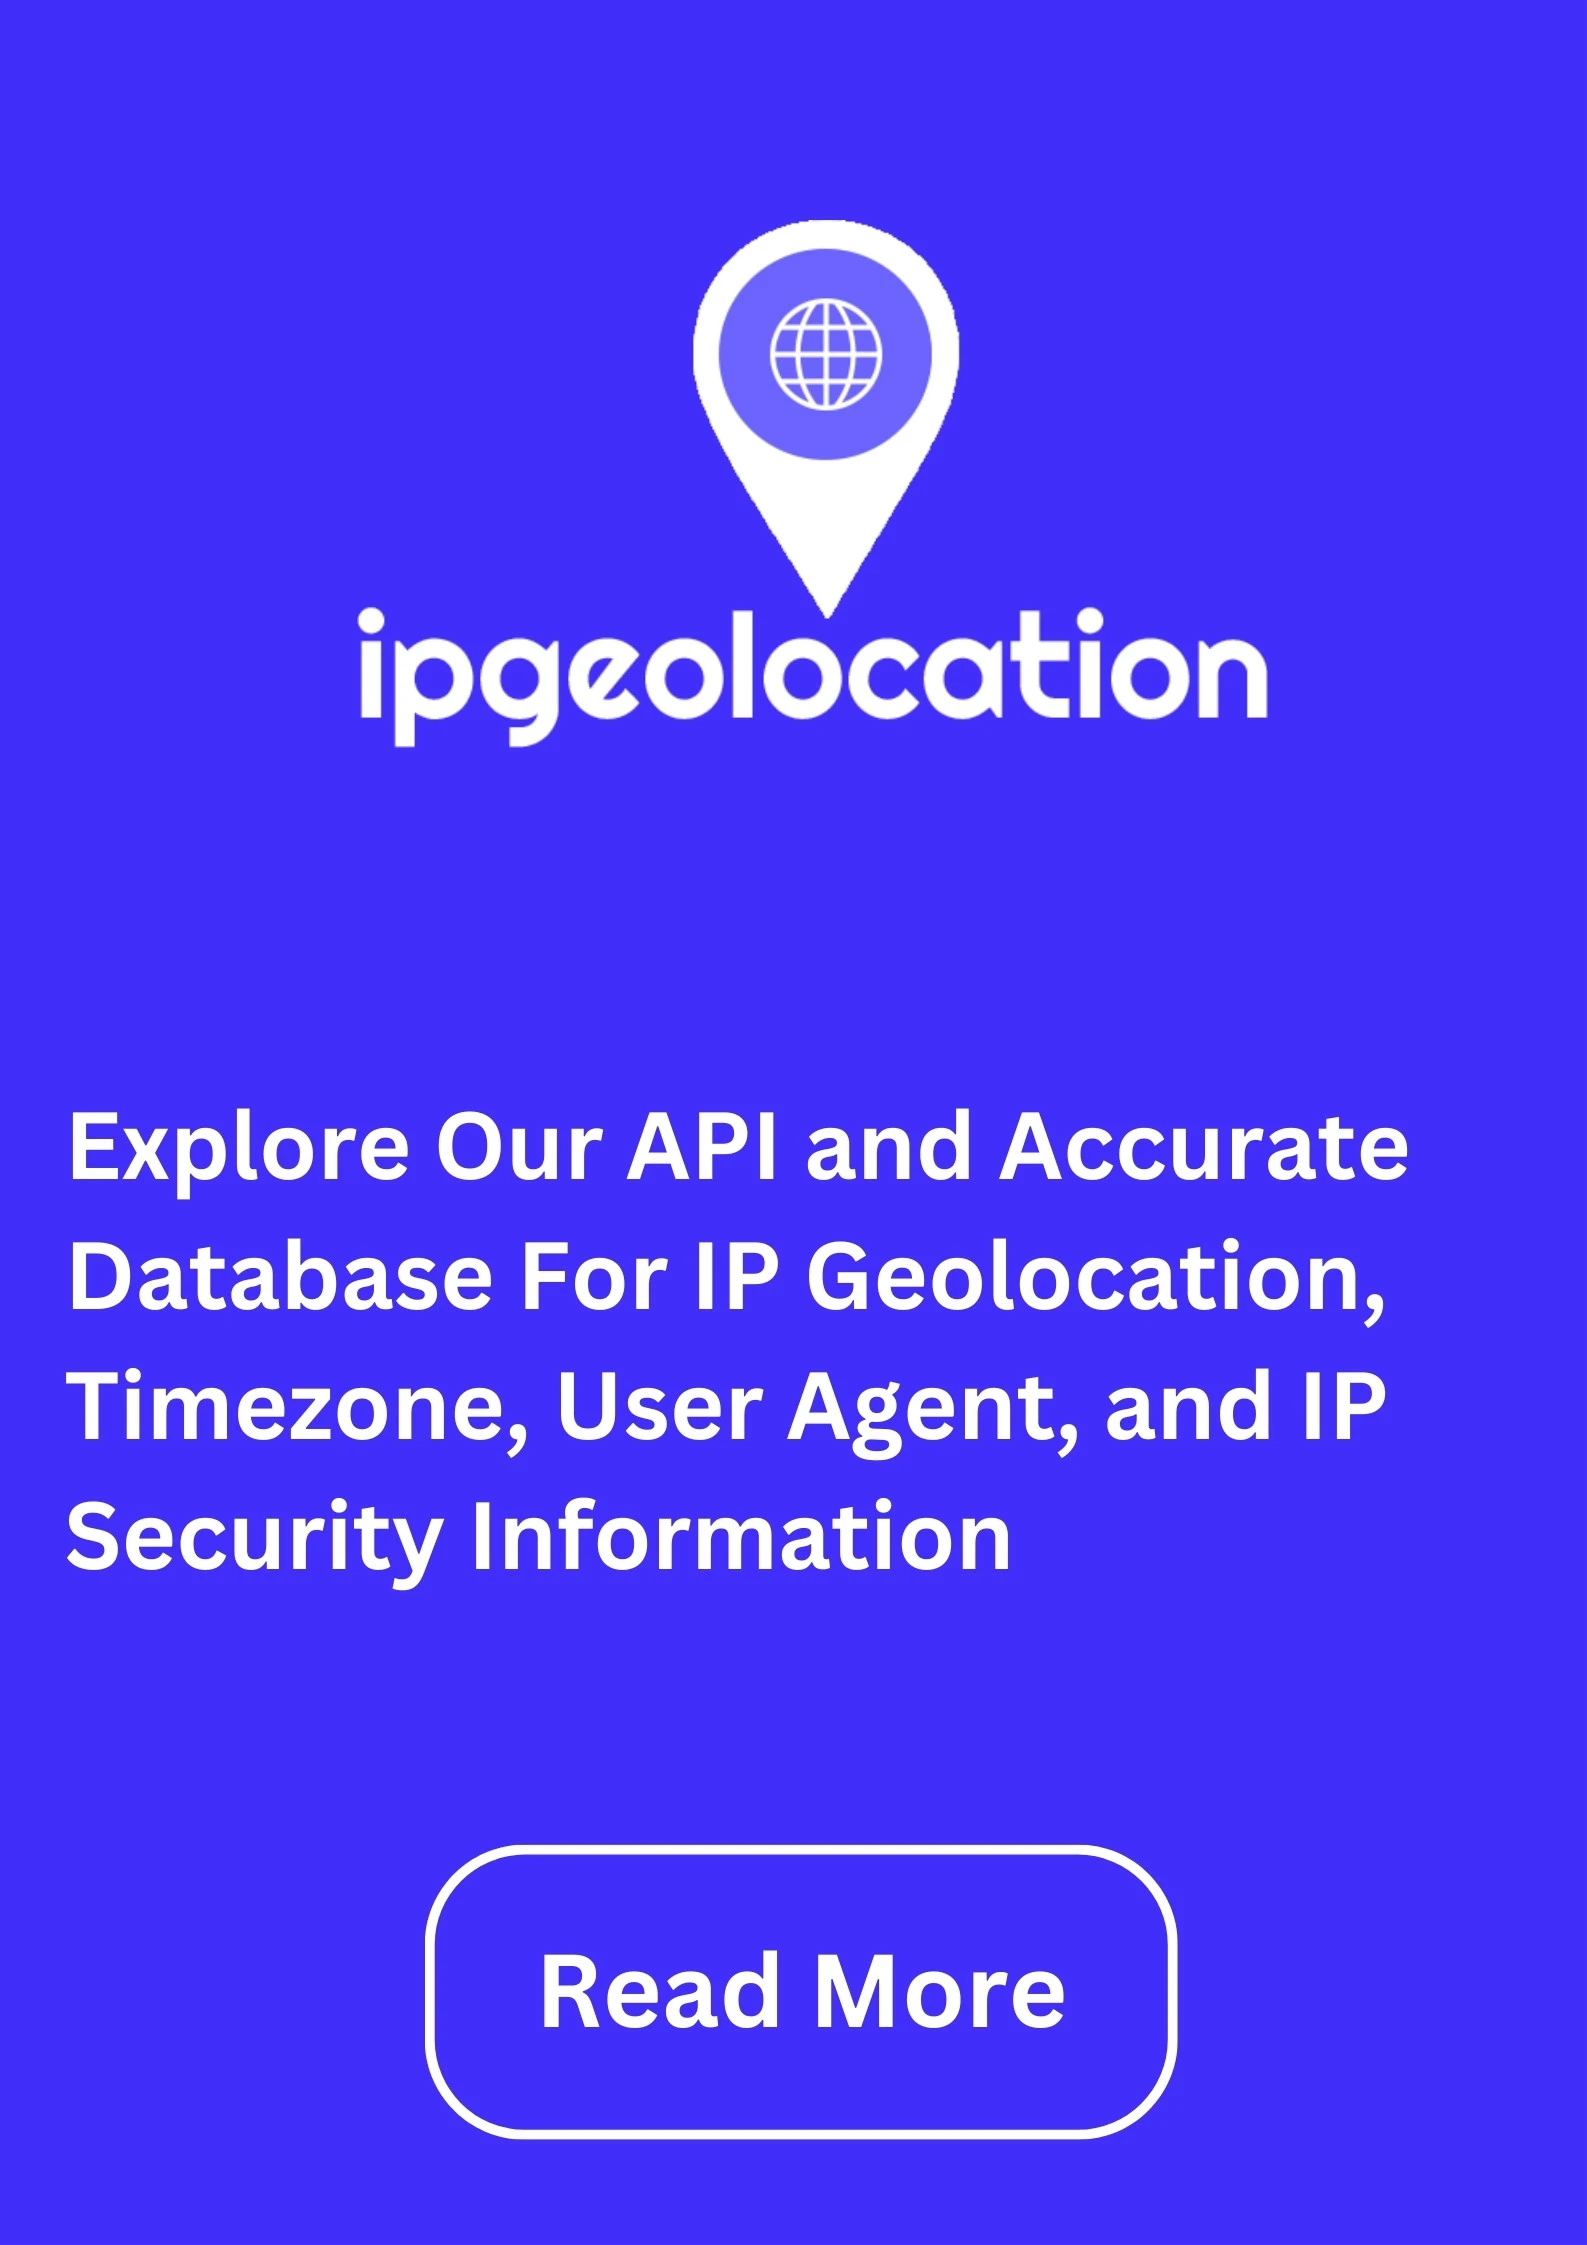 ipgeolocation-banner